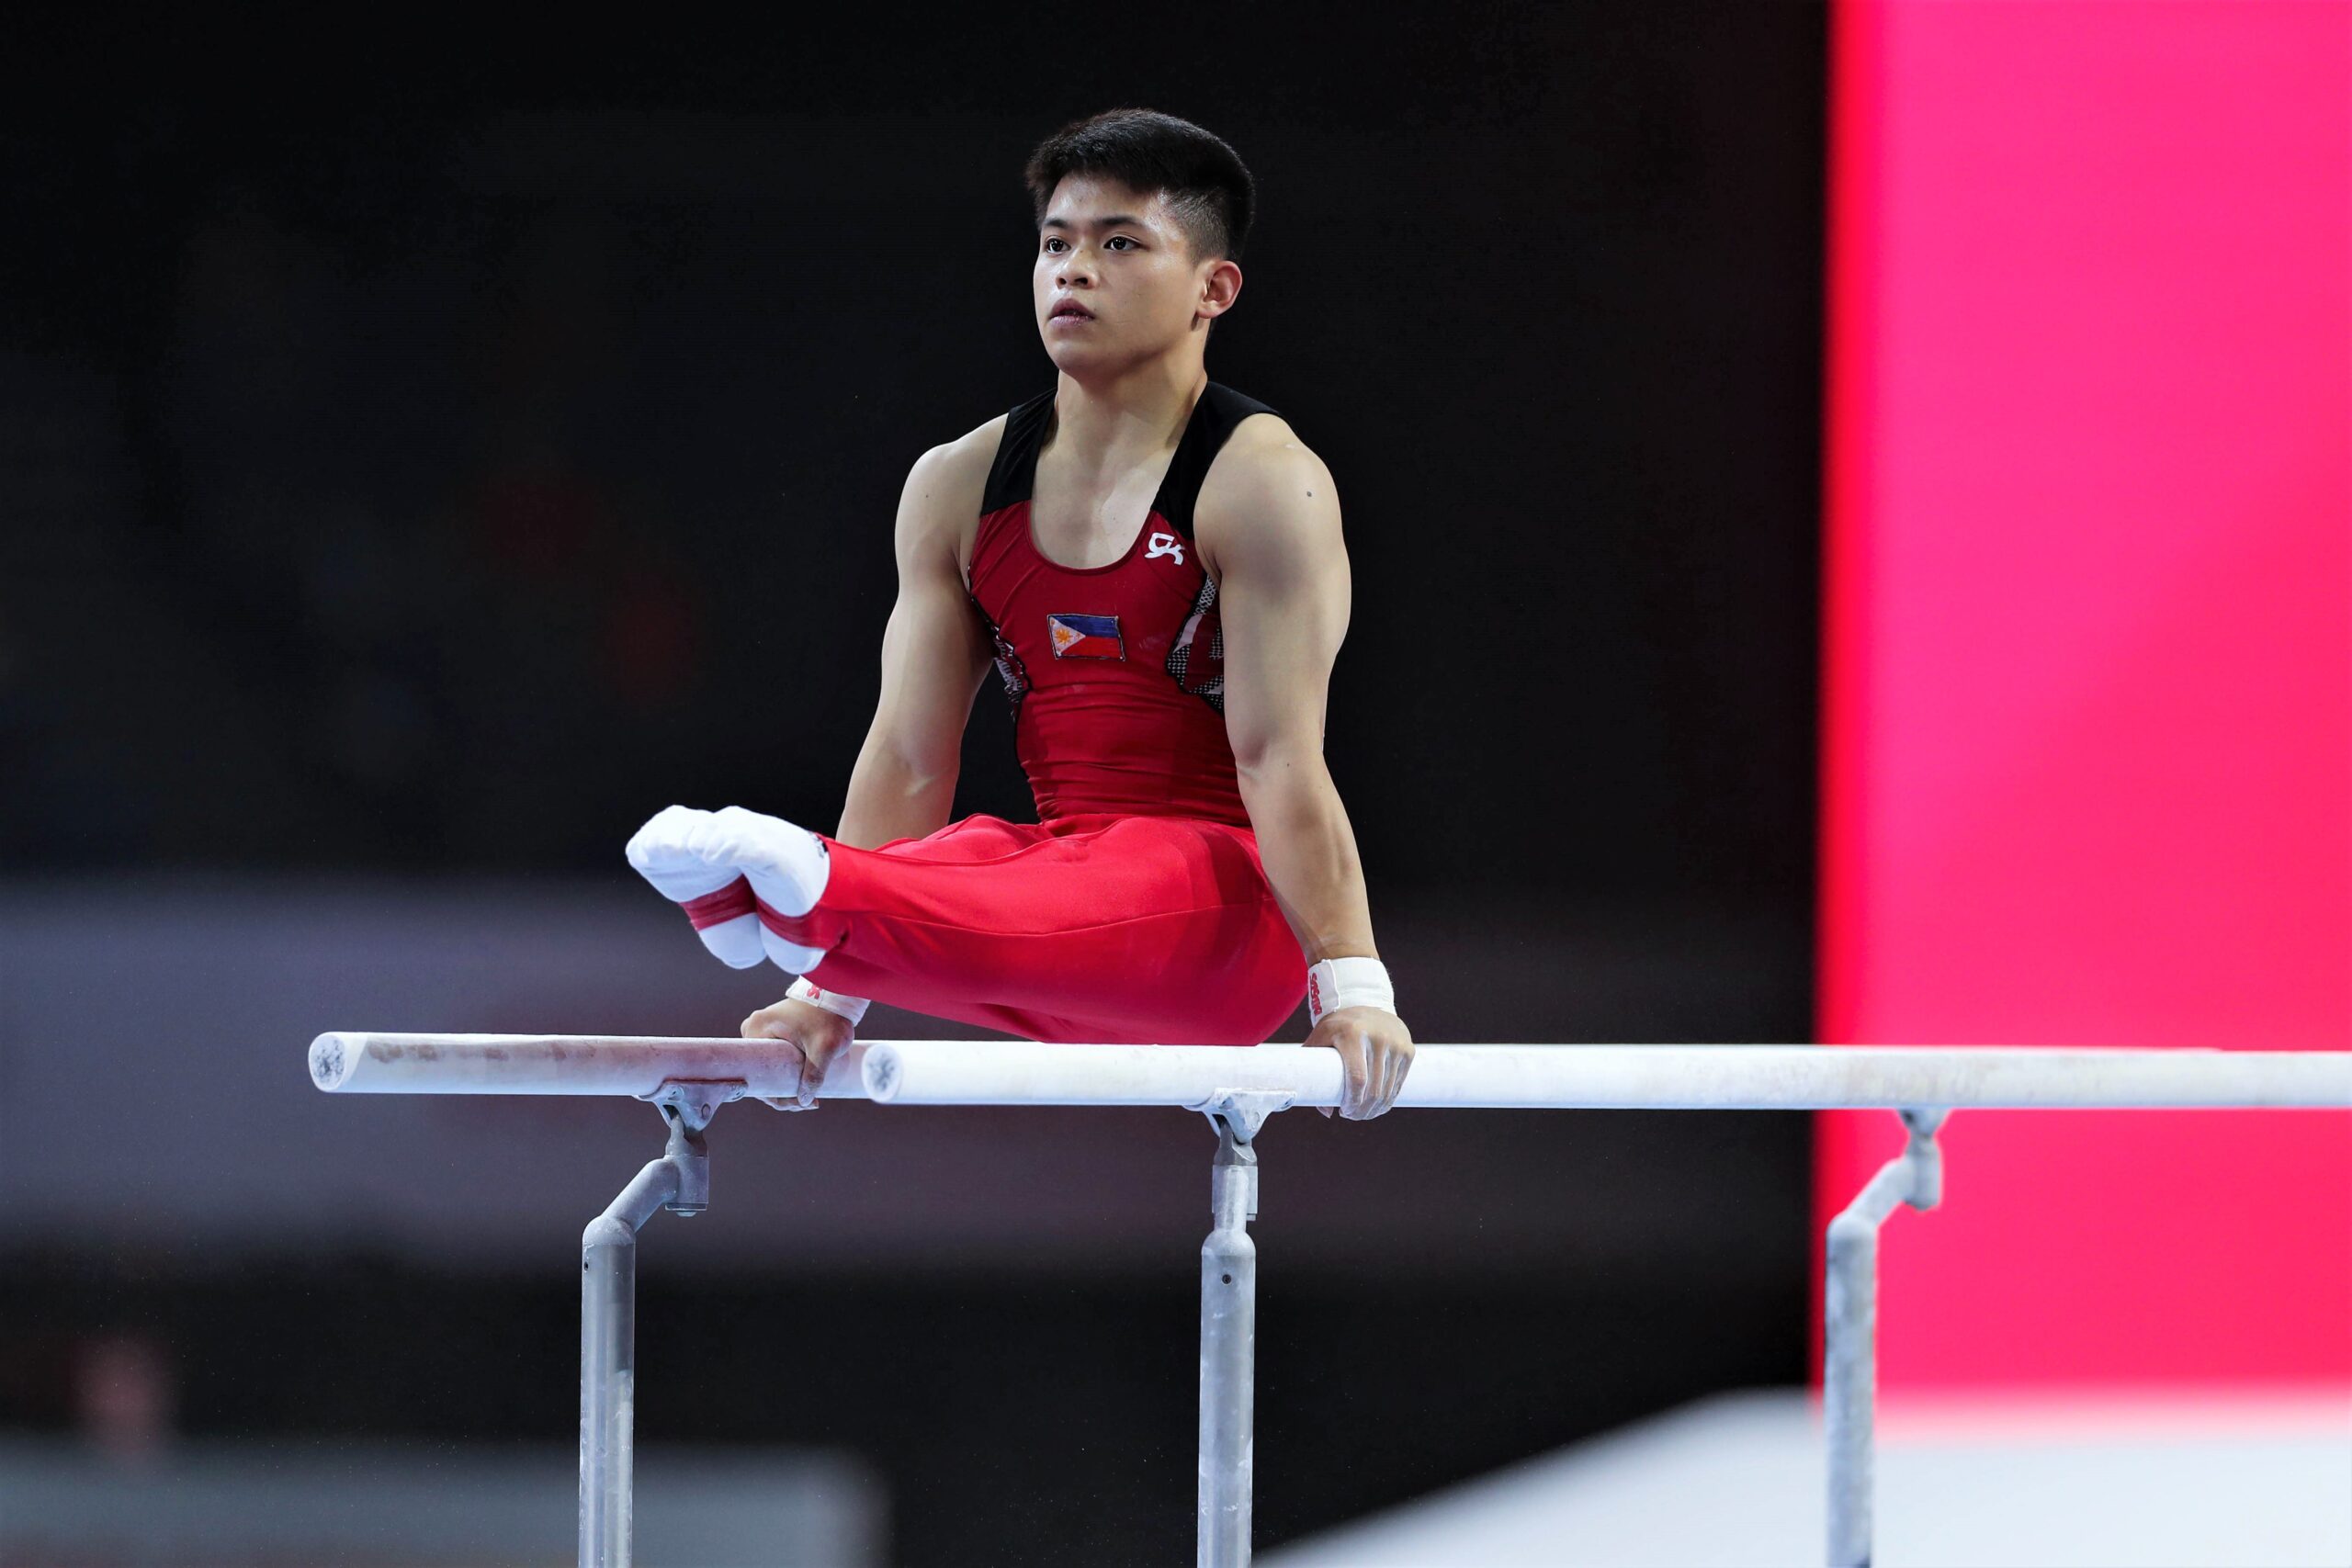 FAST FACTS: Who is gymnast Carlos Yulo?